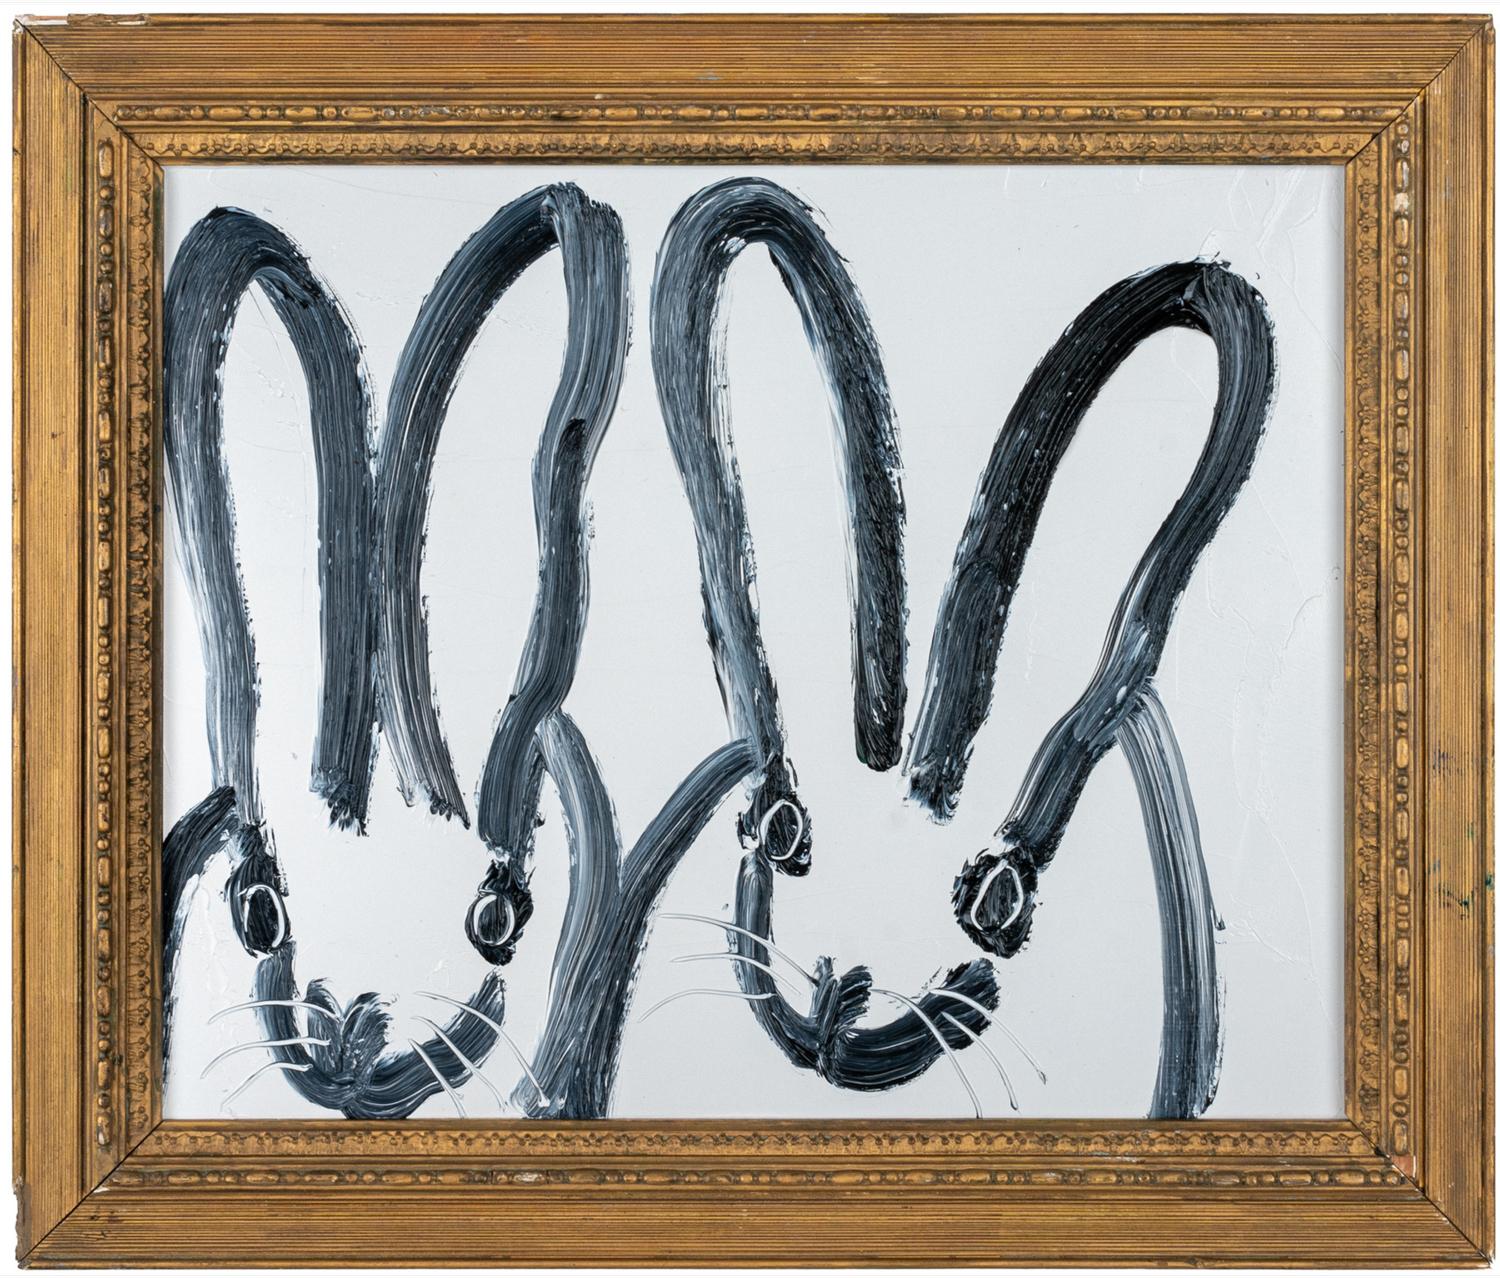 Renowned artist Hunt Slonem's "Double Bunny" is a 13.5 x 16 black and white oil painting on wood board of contemporary abstract bunnies. 

*Painting is framed - Please note that not all Hunt Slonem frames are in mint condition. There may be signs of